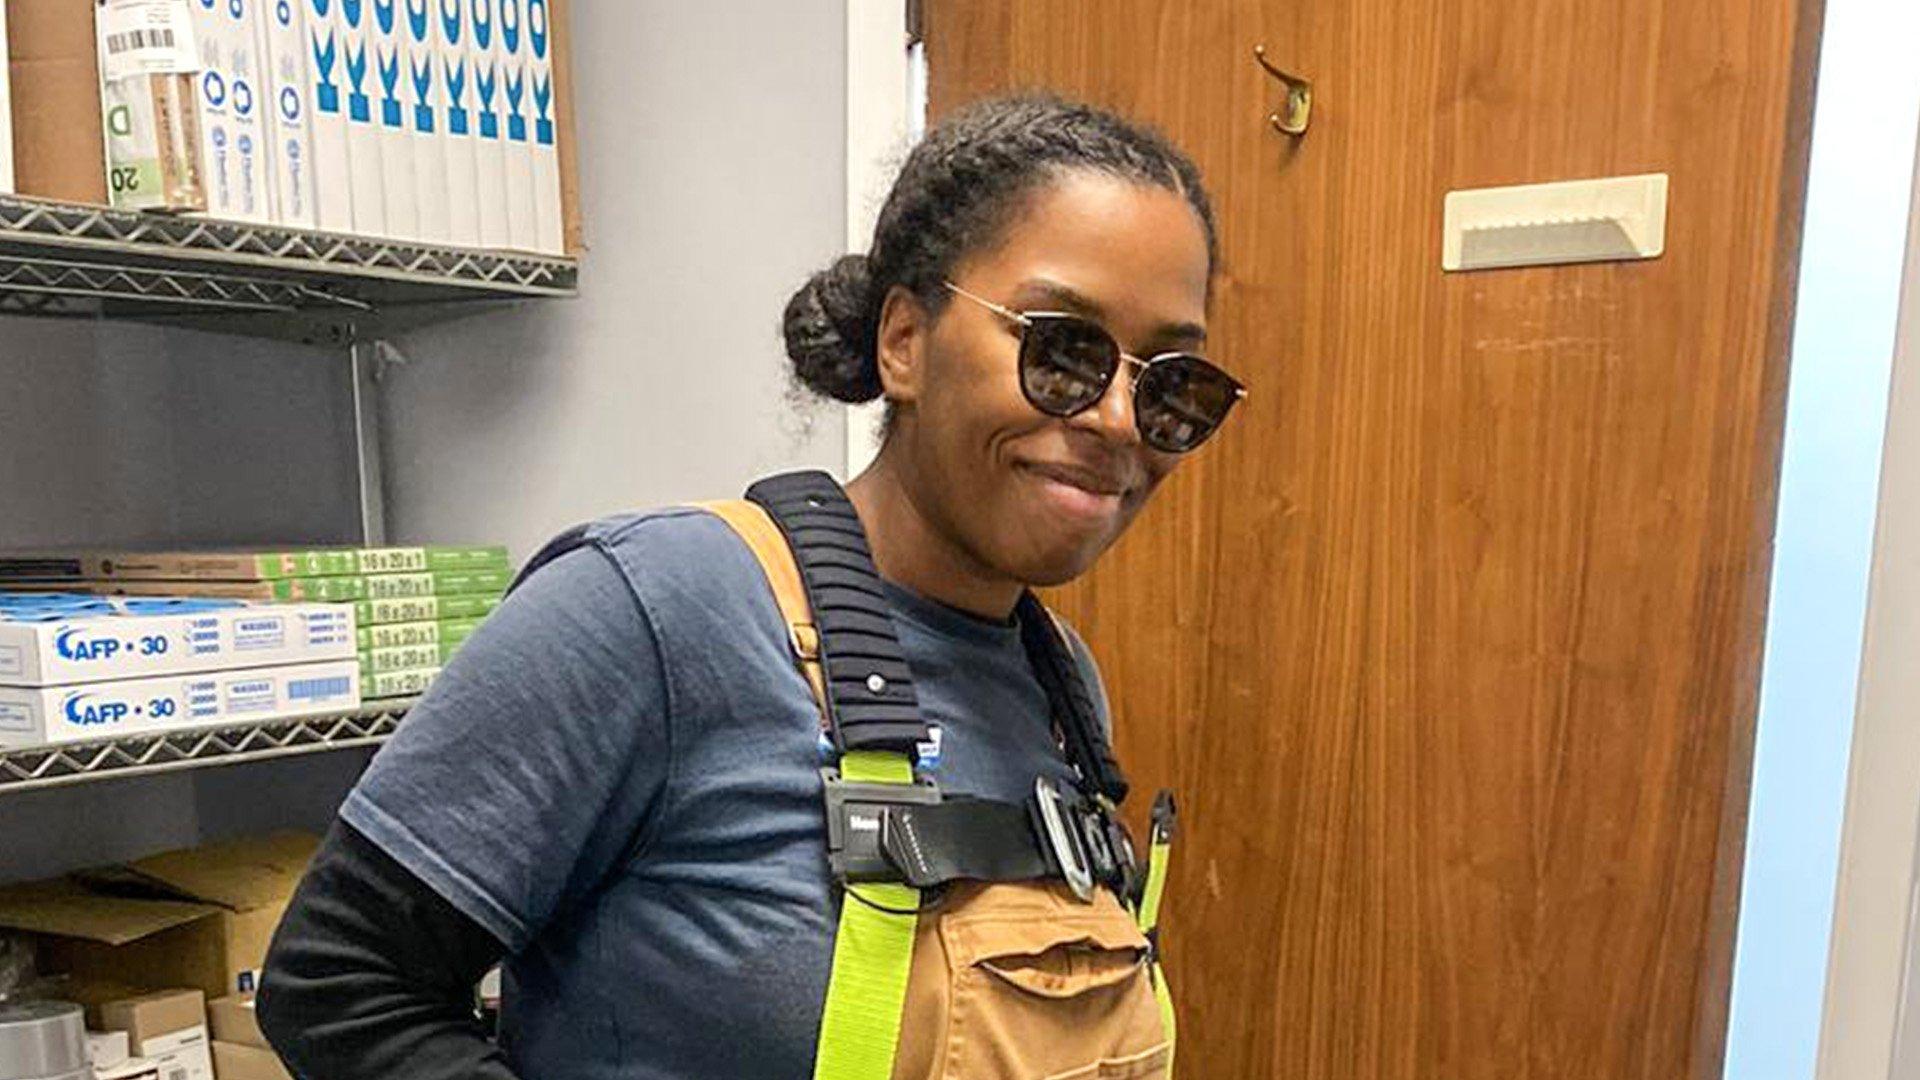 Shaquia J wears sunglasses, yellow fall protection gear and a smile at work, with HVAC supplies on shelves in the background.